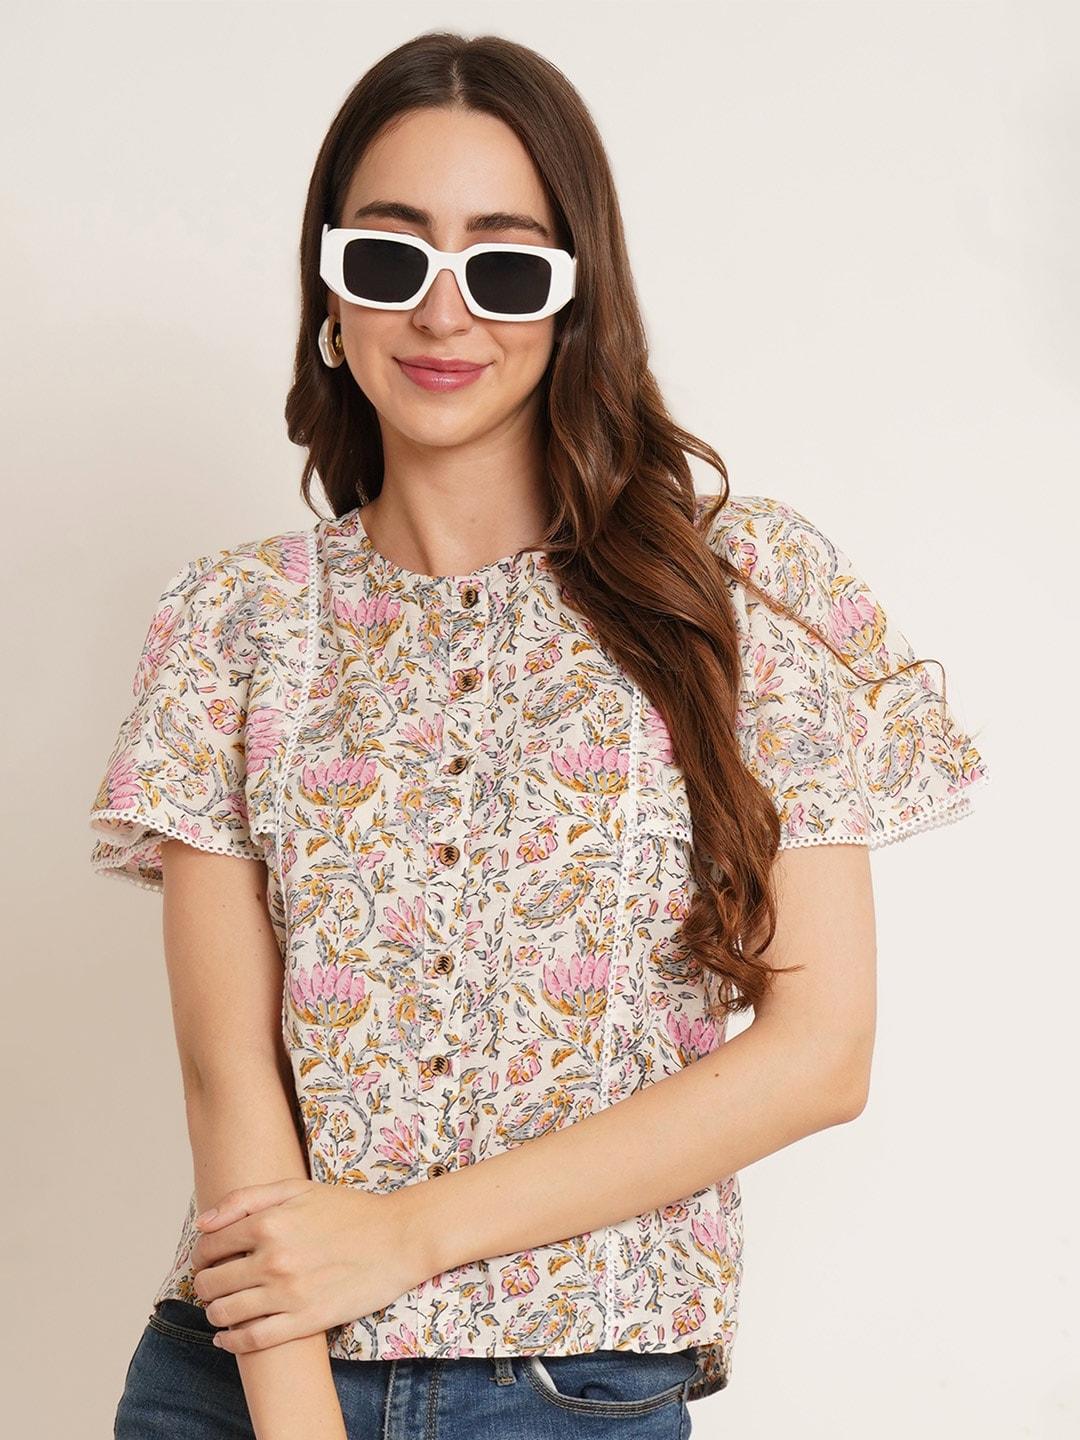 cotland fashion floral printed flutter sleeves pure cotton shirt style top